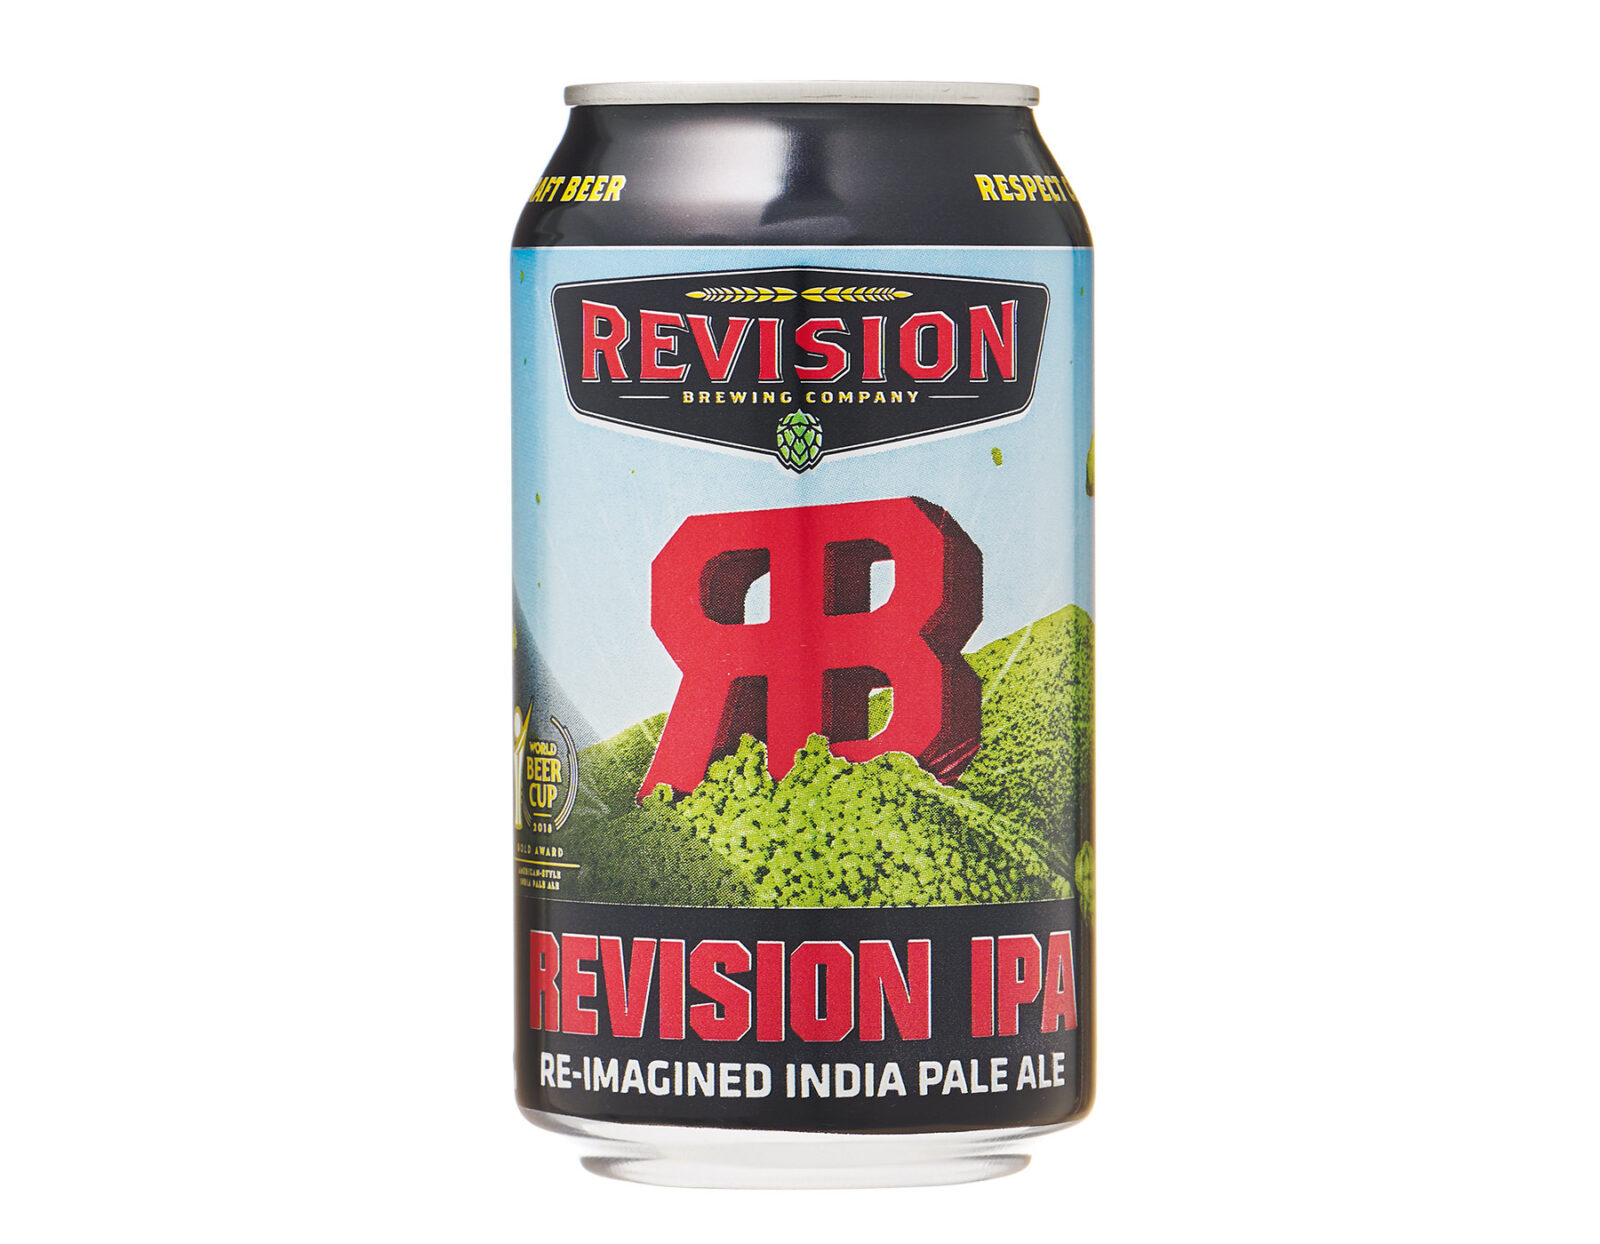 Revision Brewing（アメリカ）のRevision IPA（リヴィジョン アイピーエー）